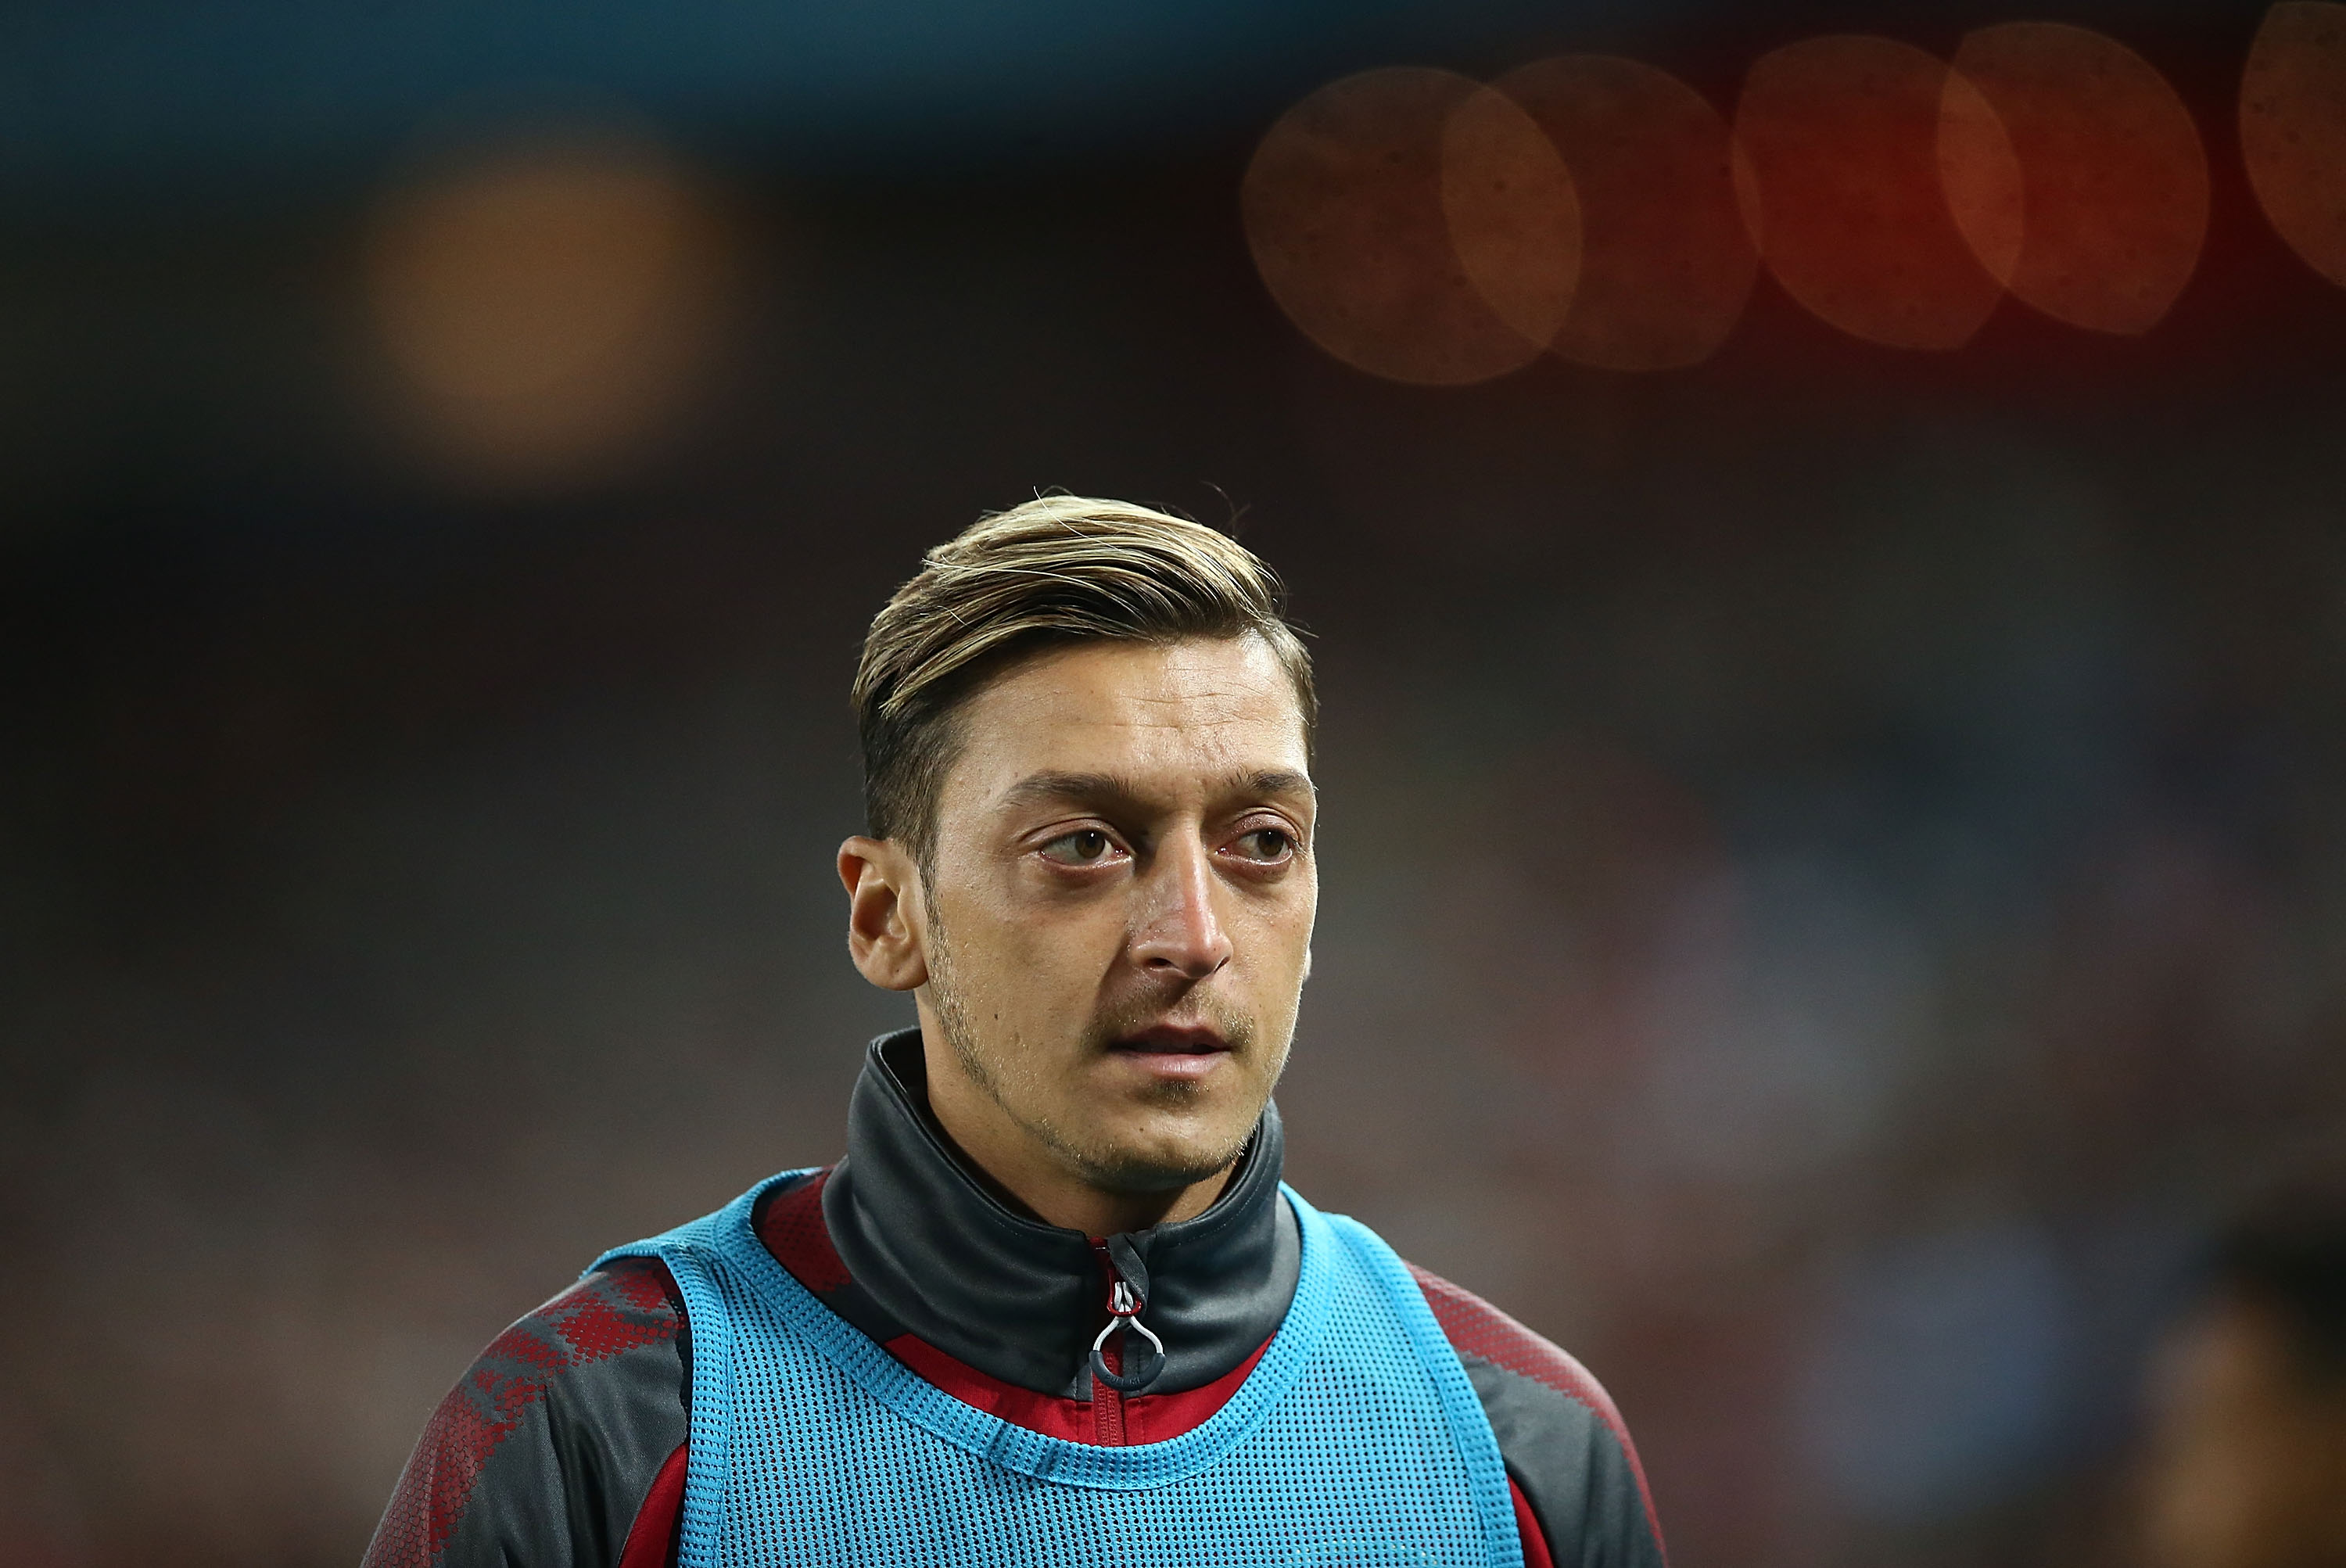 SYDNEY, AUSTRALIA - JULY 15:  Mesut Ozil of Arsenal looks on during the match between the Western Sydney Wanderers and Arsenal FC at ANZ Stadium on July 15, 2017 in Sydney, Australia.  (Photo by Mark Metcalfe/Getty Images)